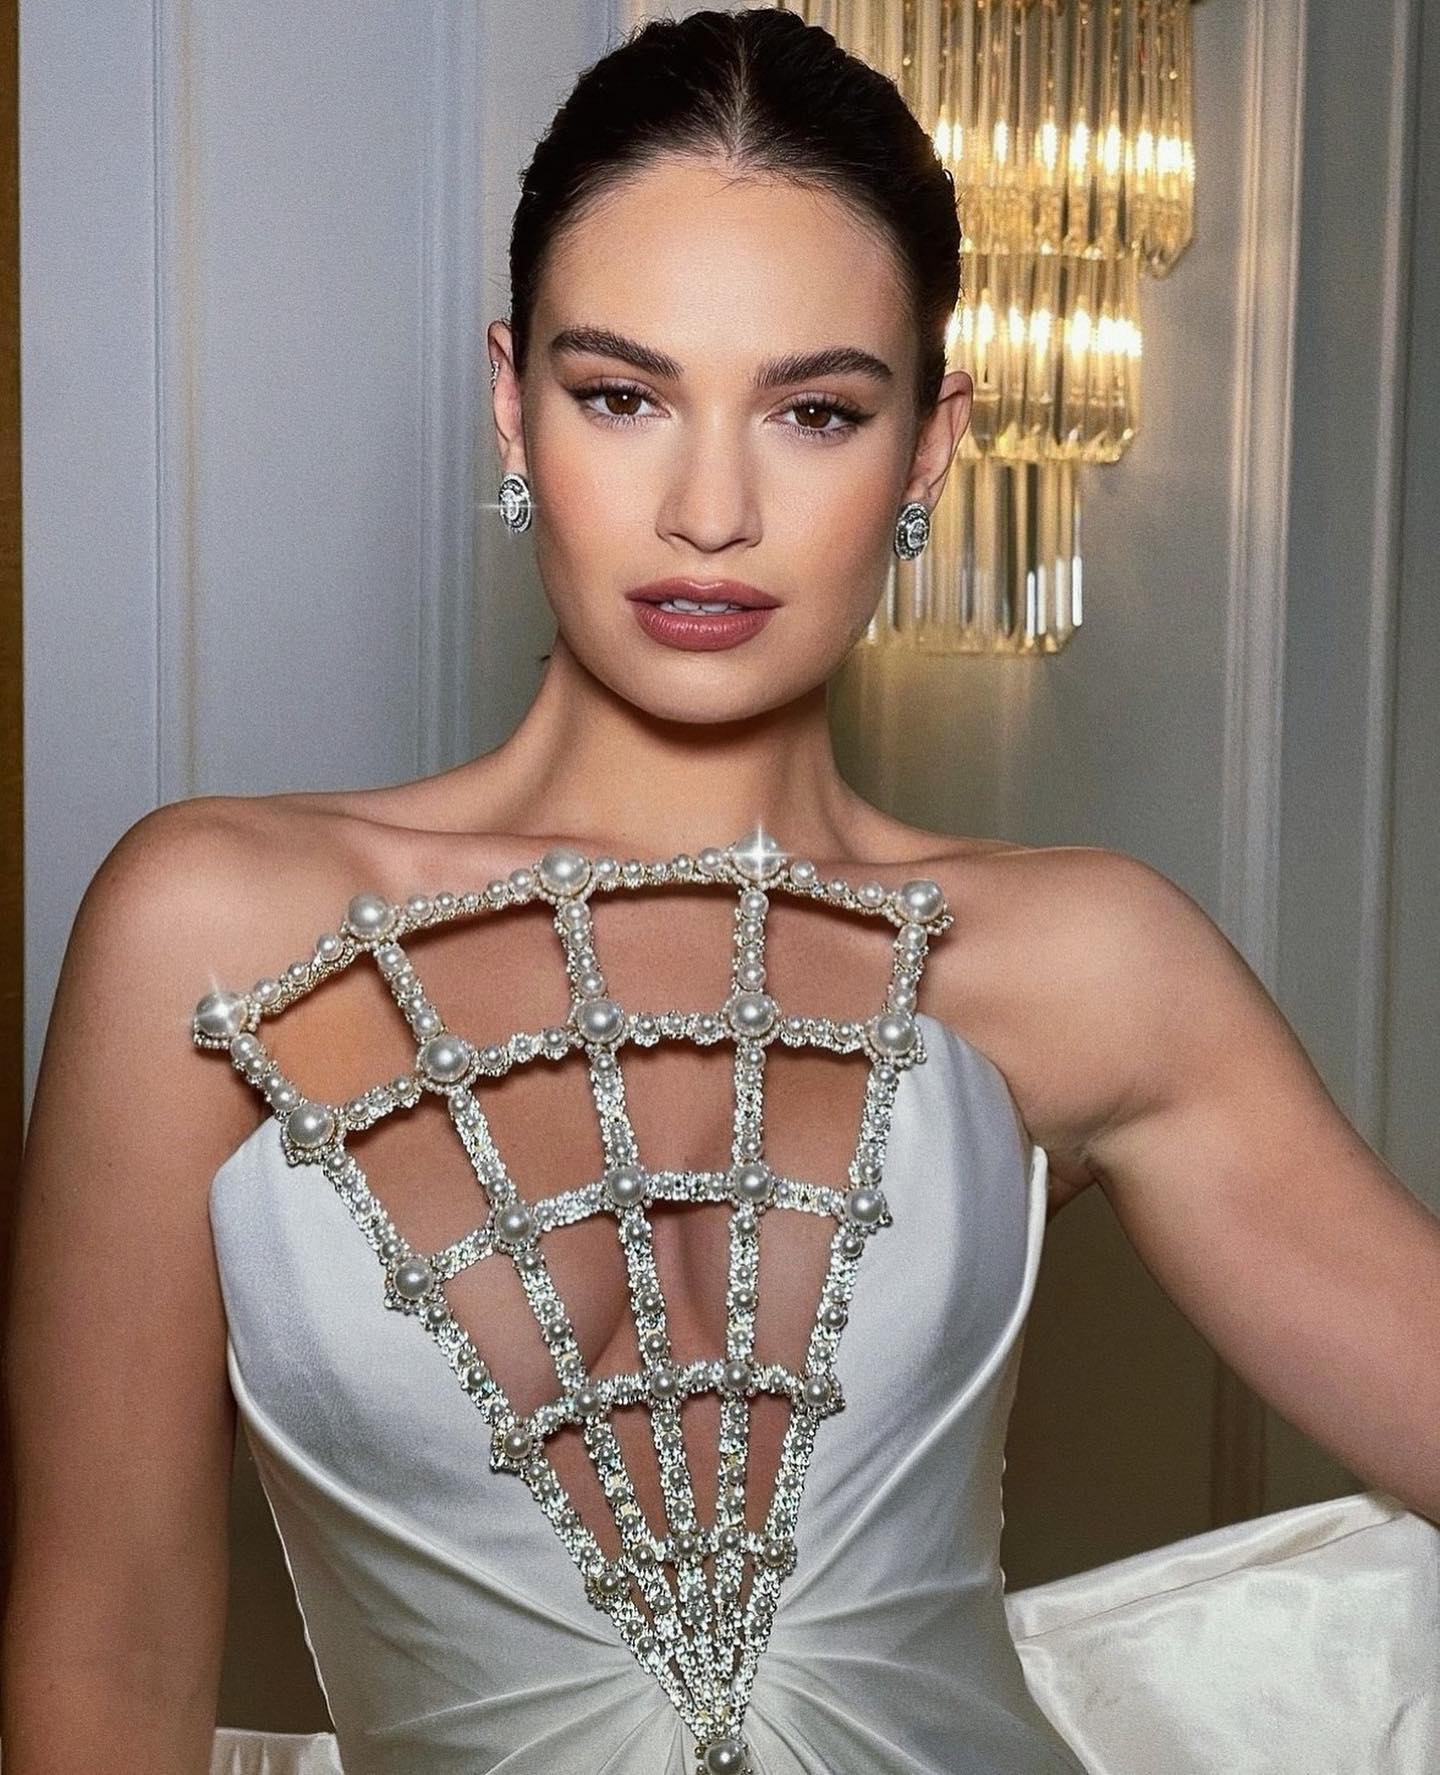 Lily James dress is insanely gorgeous!